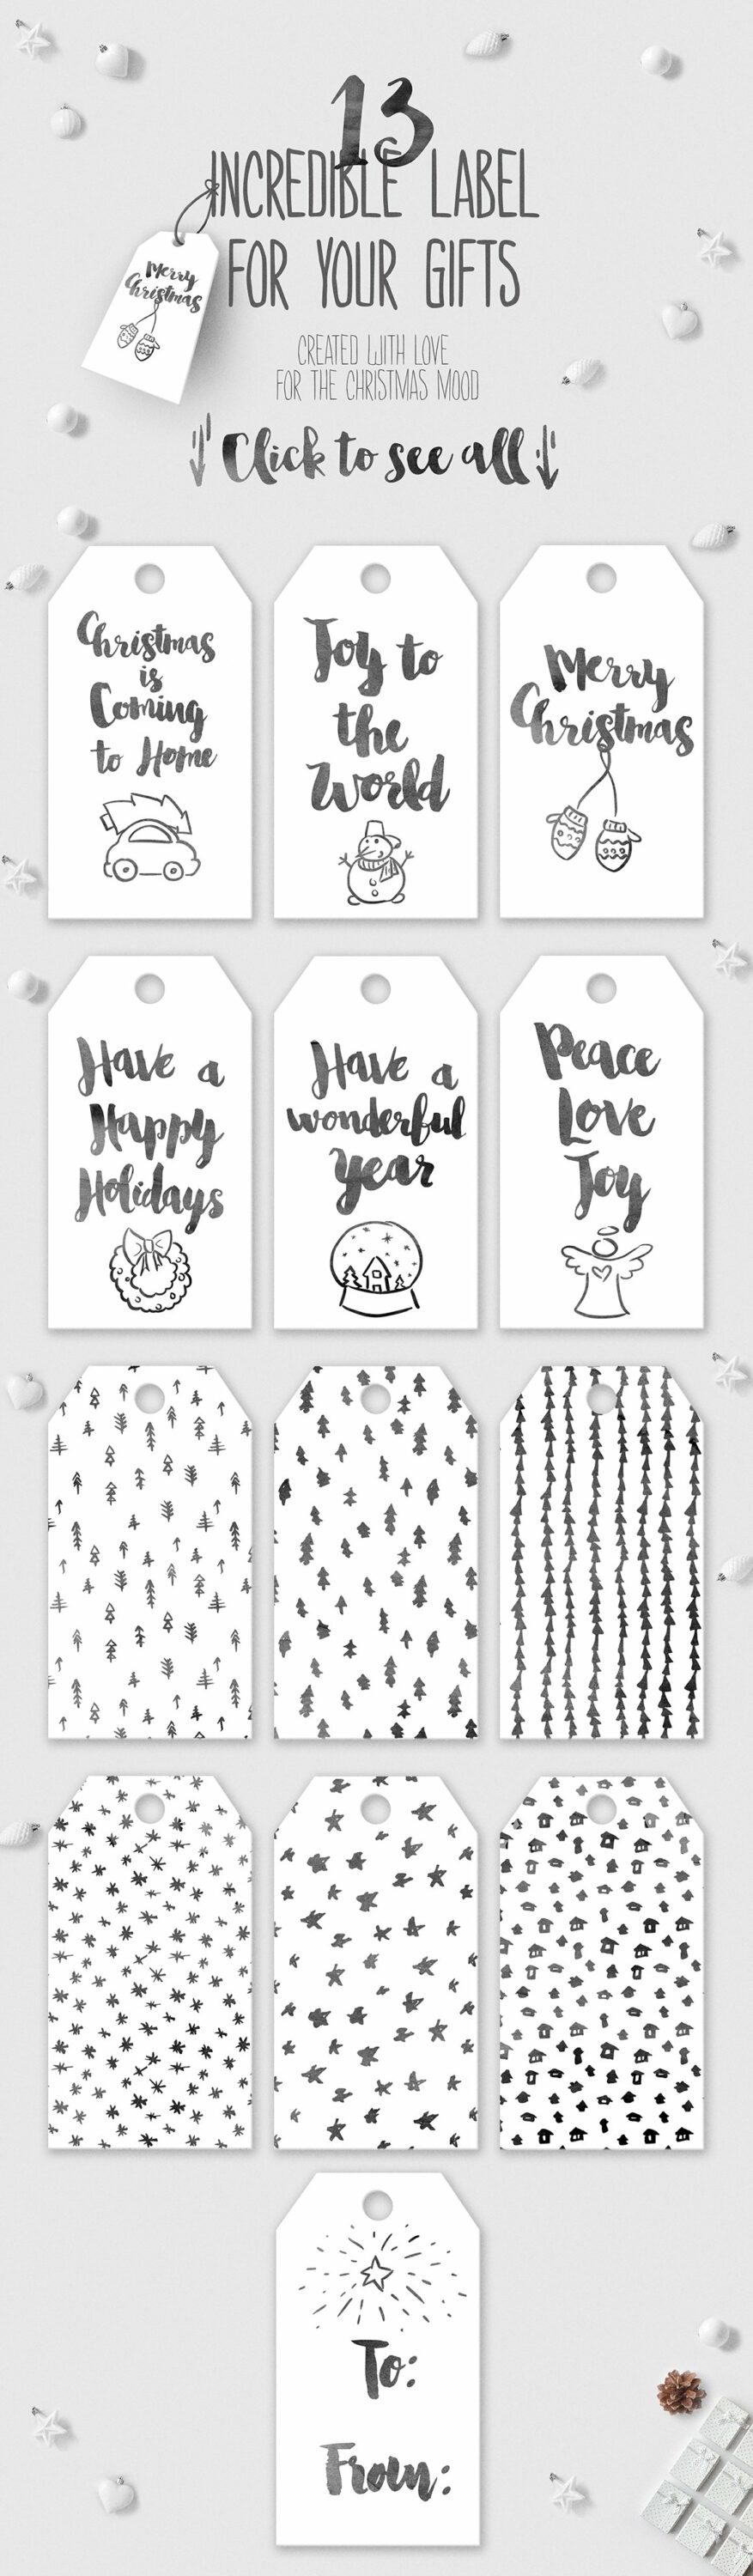 A set of 13 black different incredible label for your gifts on a gray background.